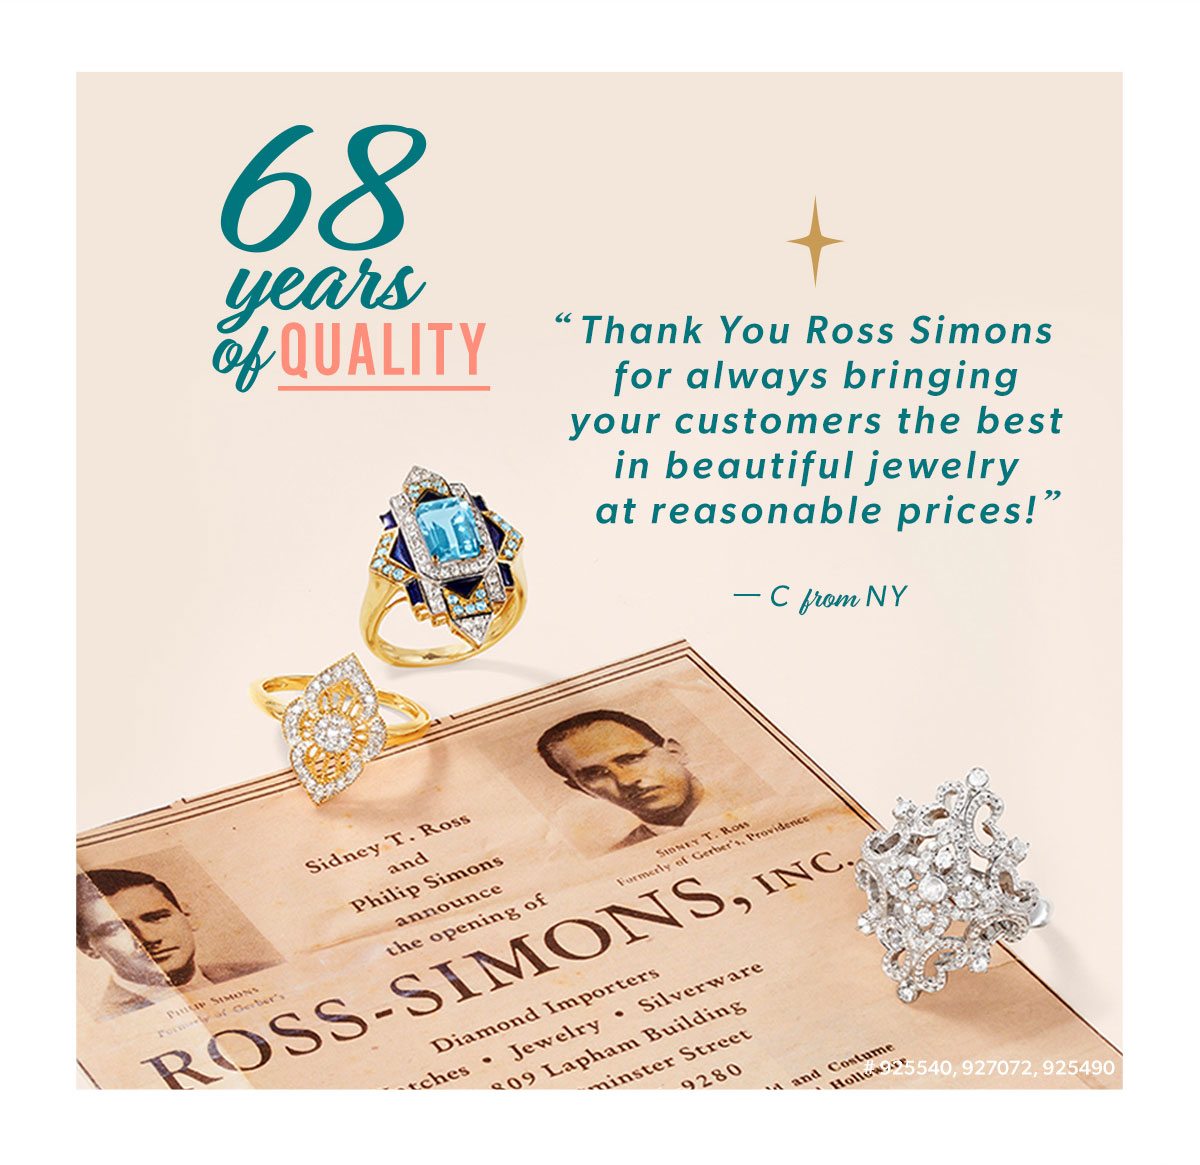 68 Years of Quality. Shop Now